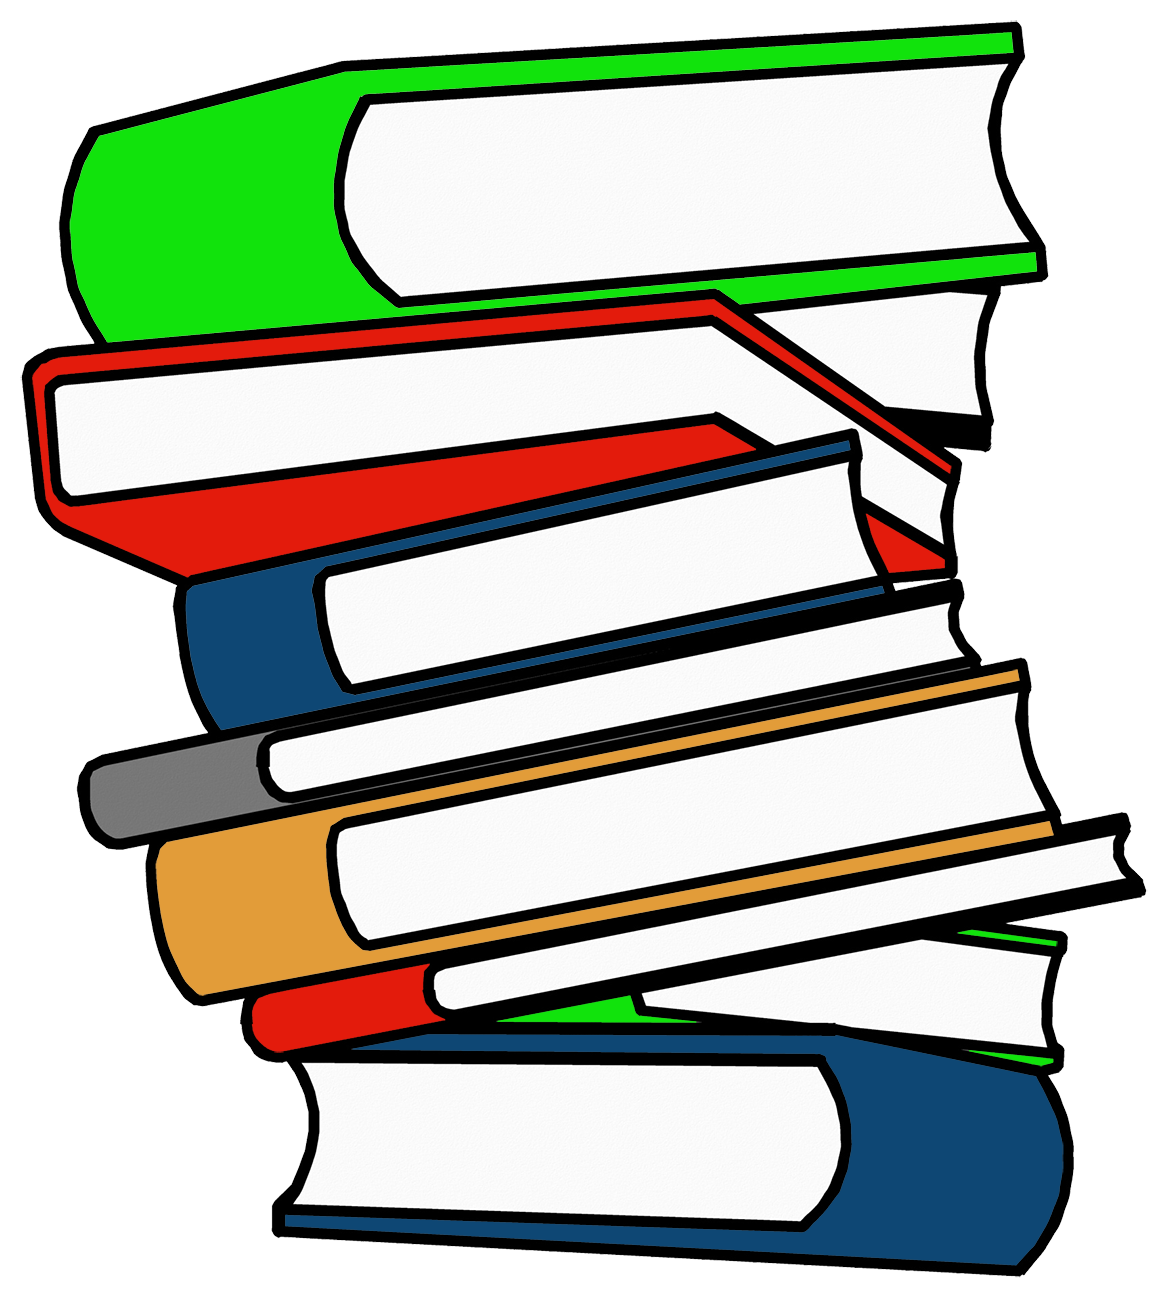 stack of books in different colors